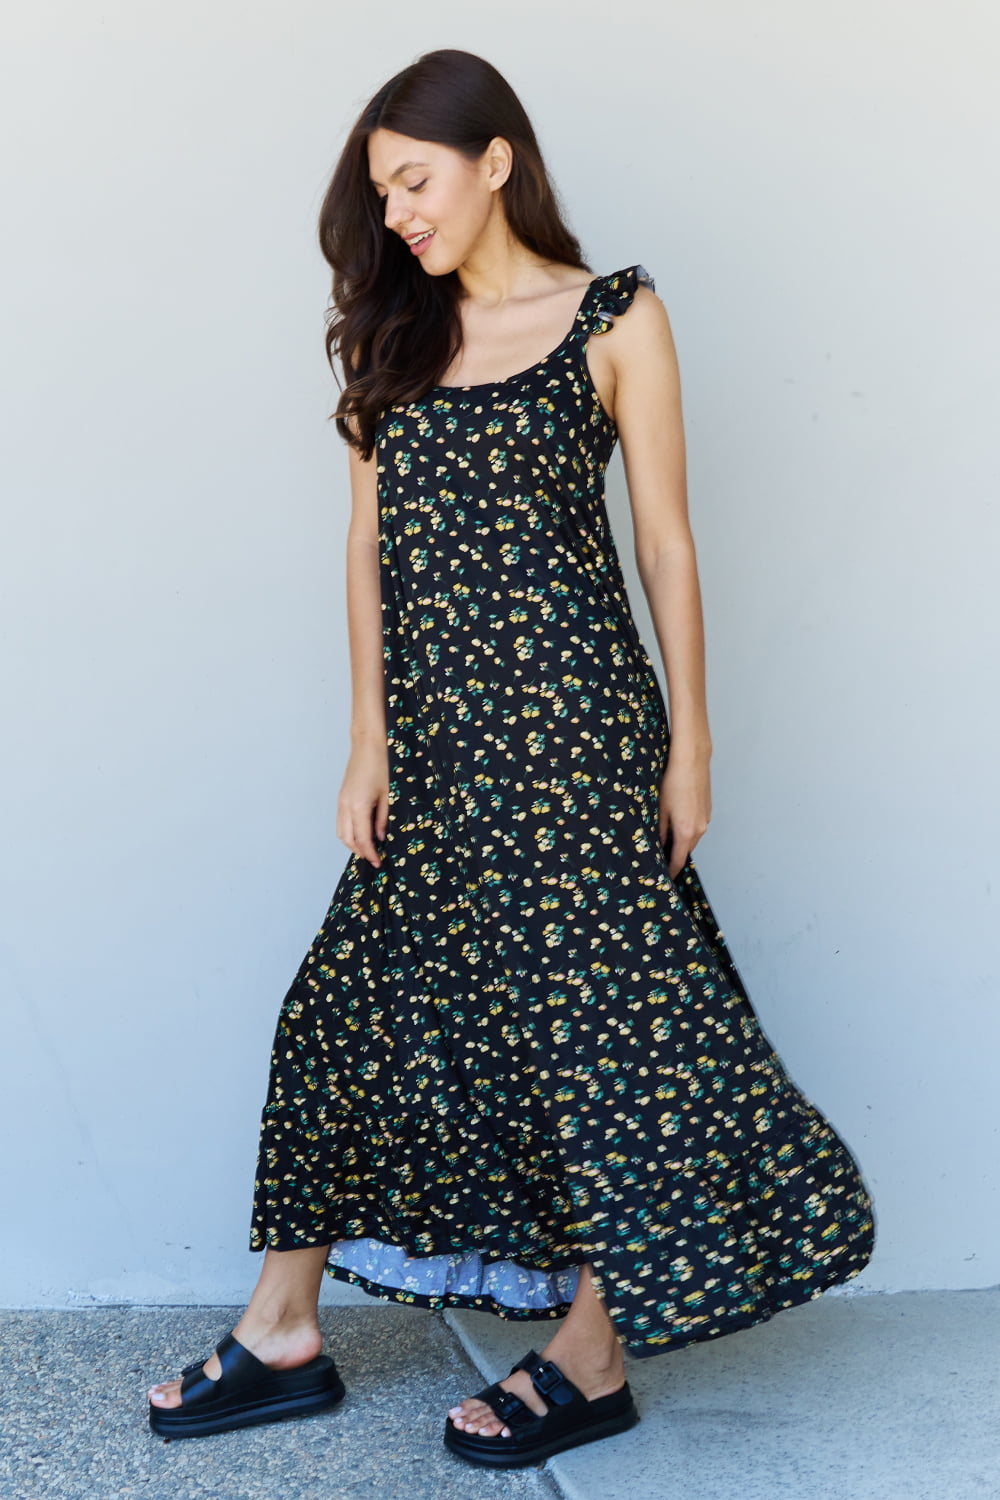 Doublju In The Garden Ruffle Floral Maxi Dress in Black Yellow Floral - Casual & Maxi Dresses - FITGGINS